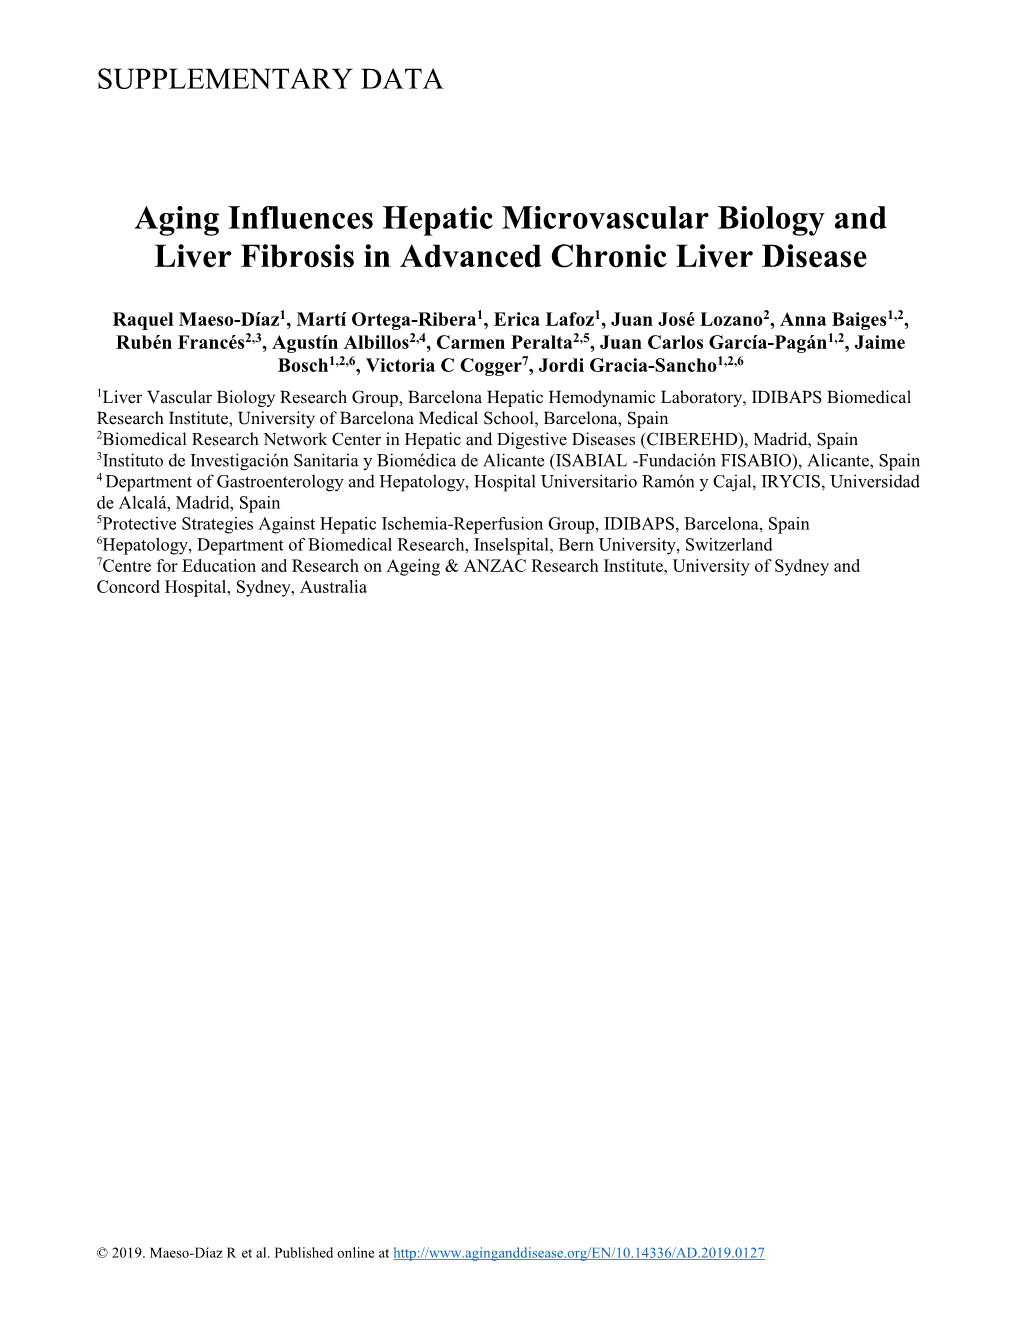 Aging Influences Hepatic Microvascular Biology and Liver Fibrosis in Advanced Chronic Liver Disease